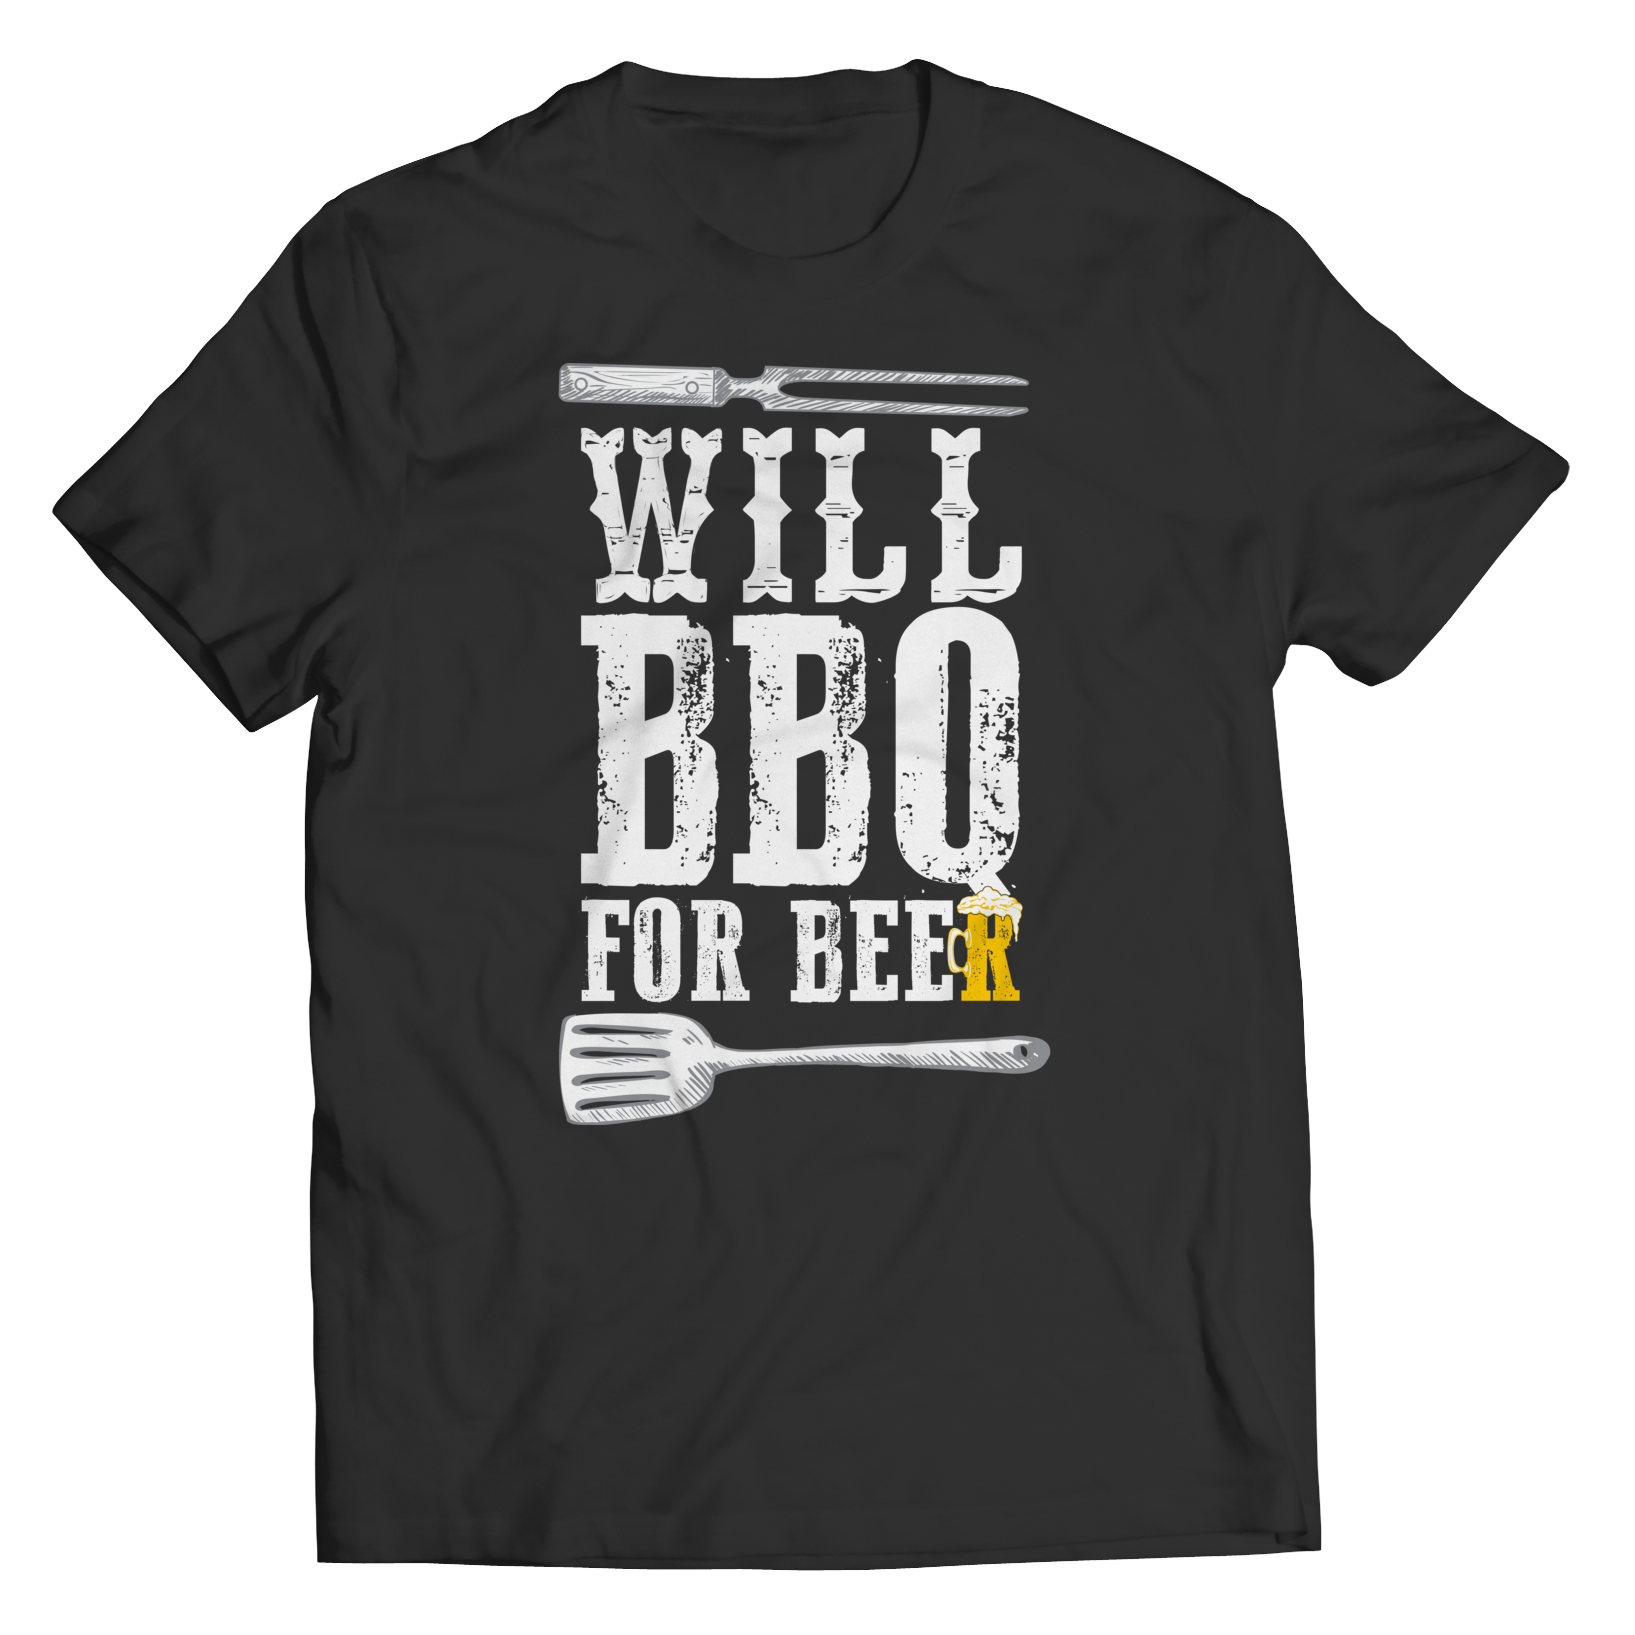 Limited Edition - Will BBQ For Beer 1